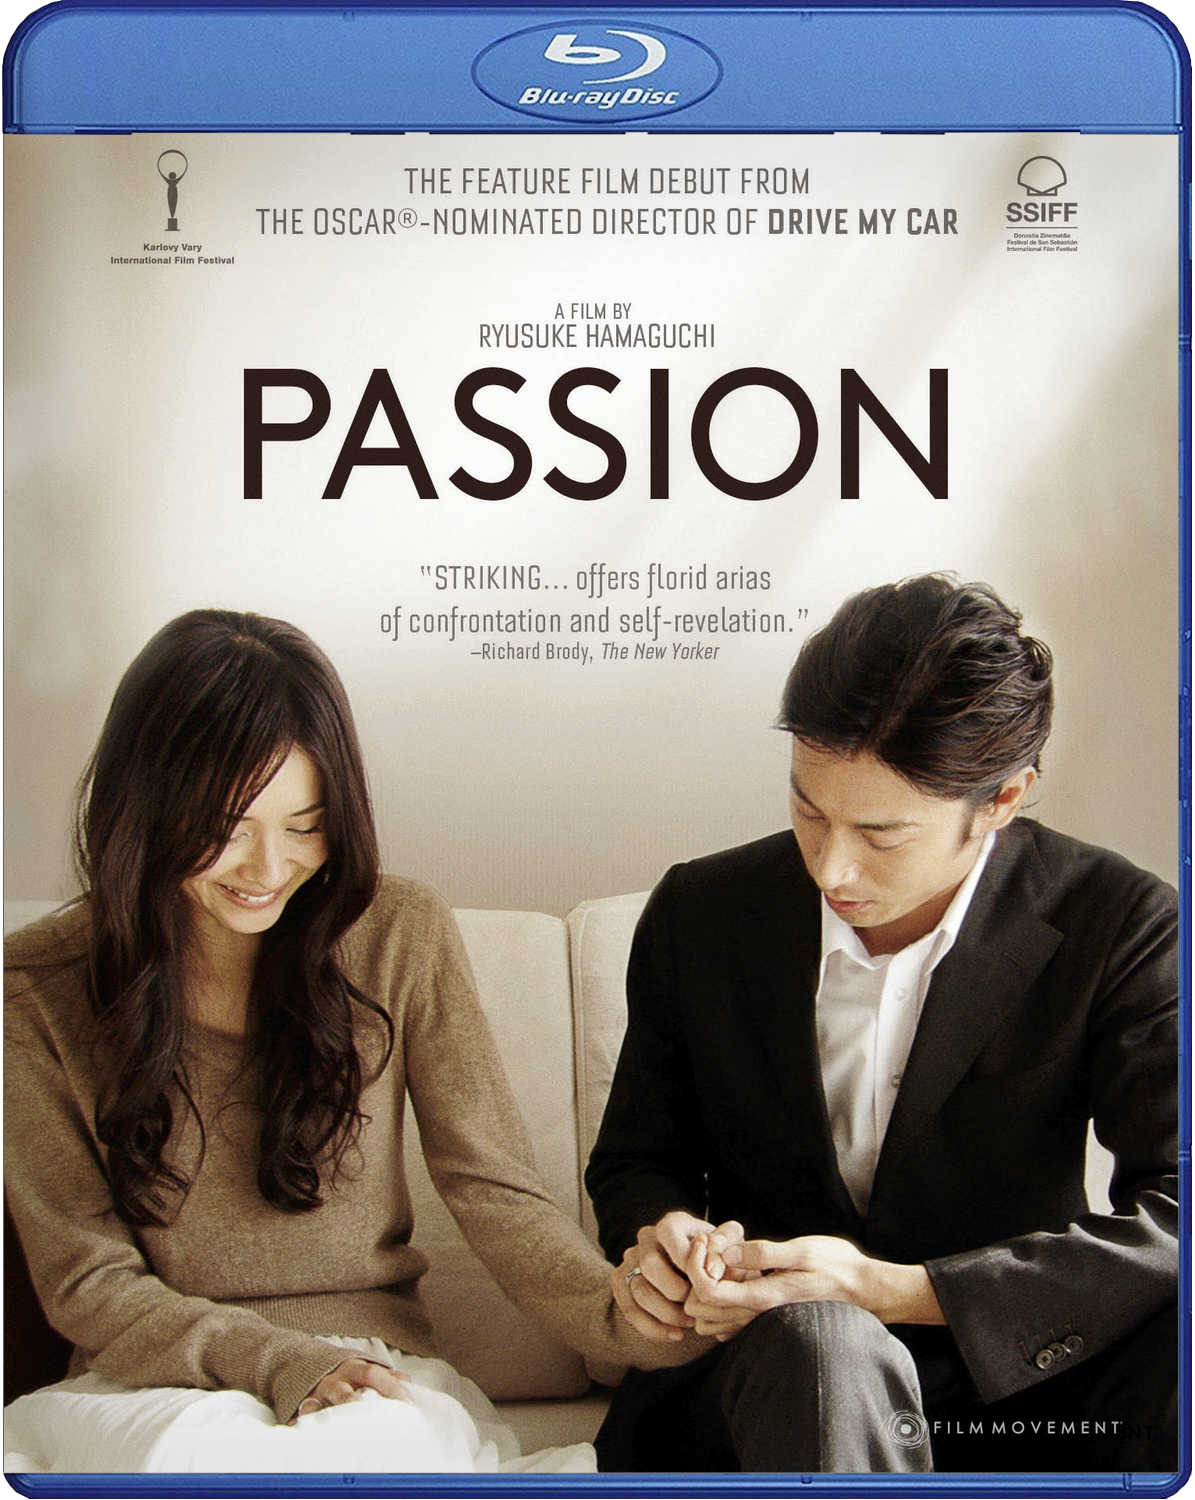 Ryusuke Hamaguchi's Passion is a raw and unforgettable debut feature that explores the emotional turmoil of a love triangle. Buy the Blu-ray today!